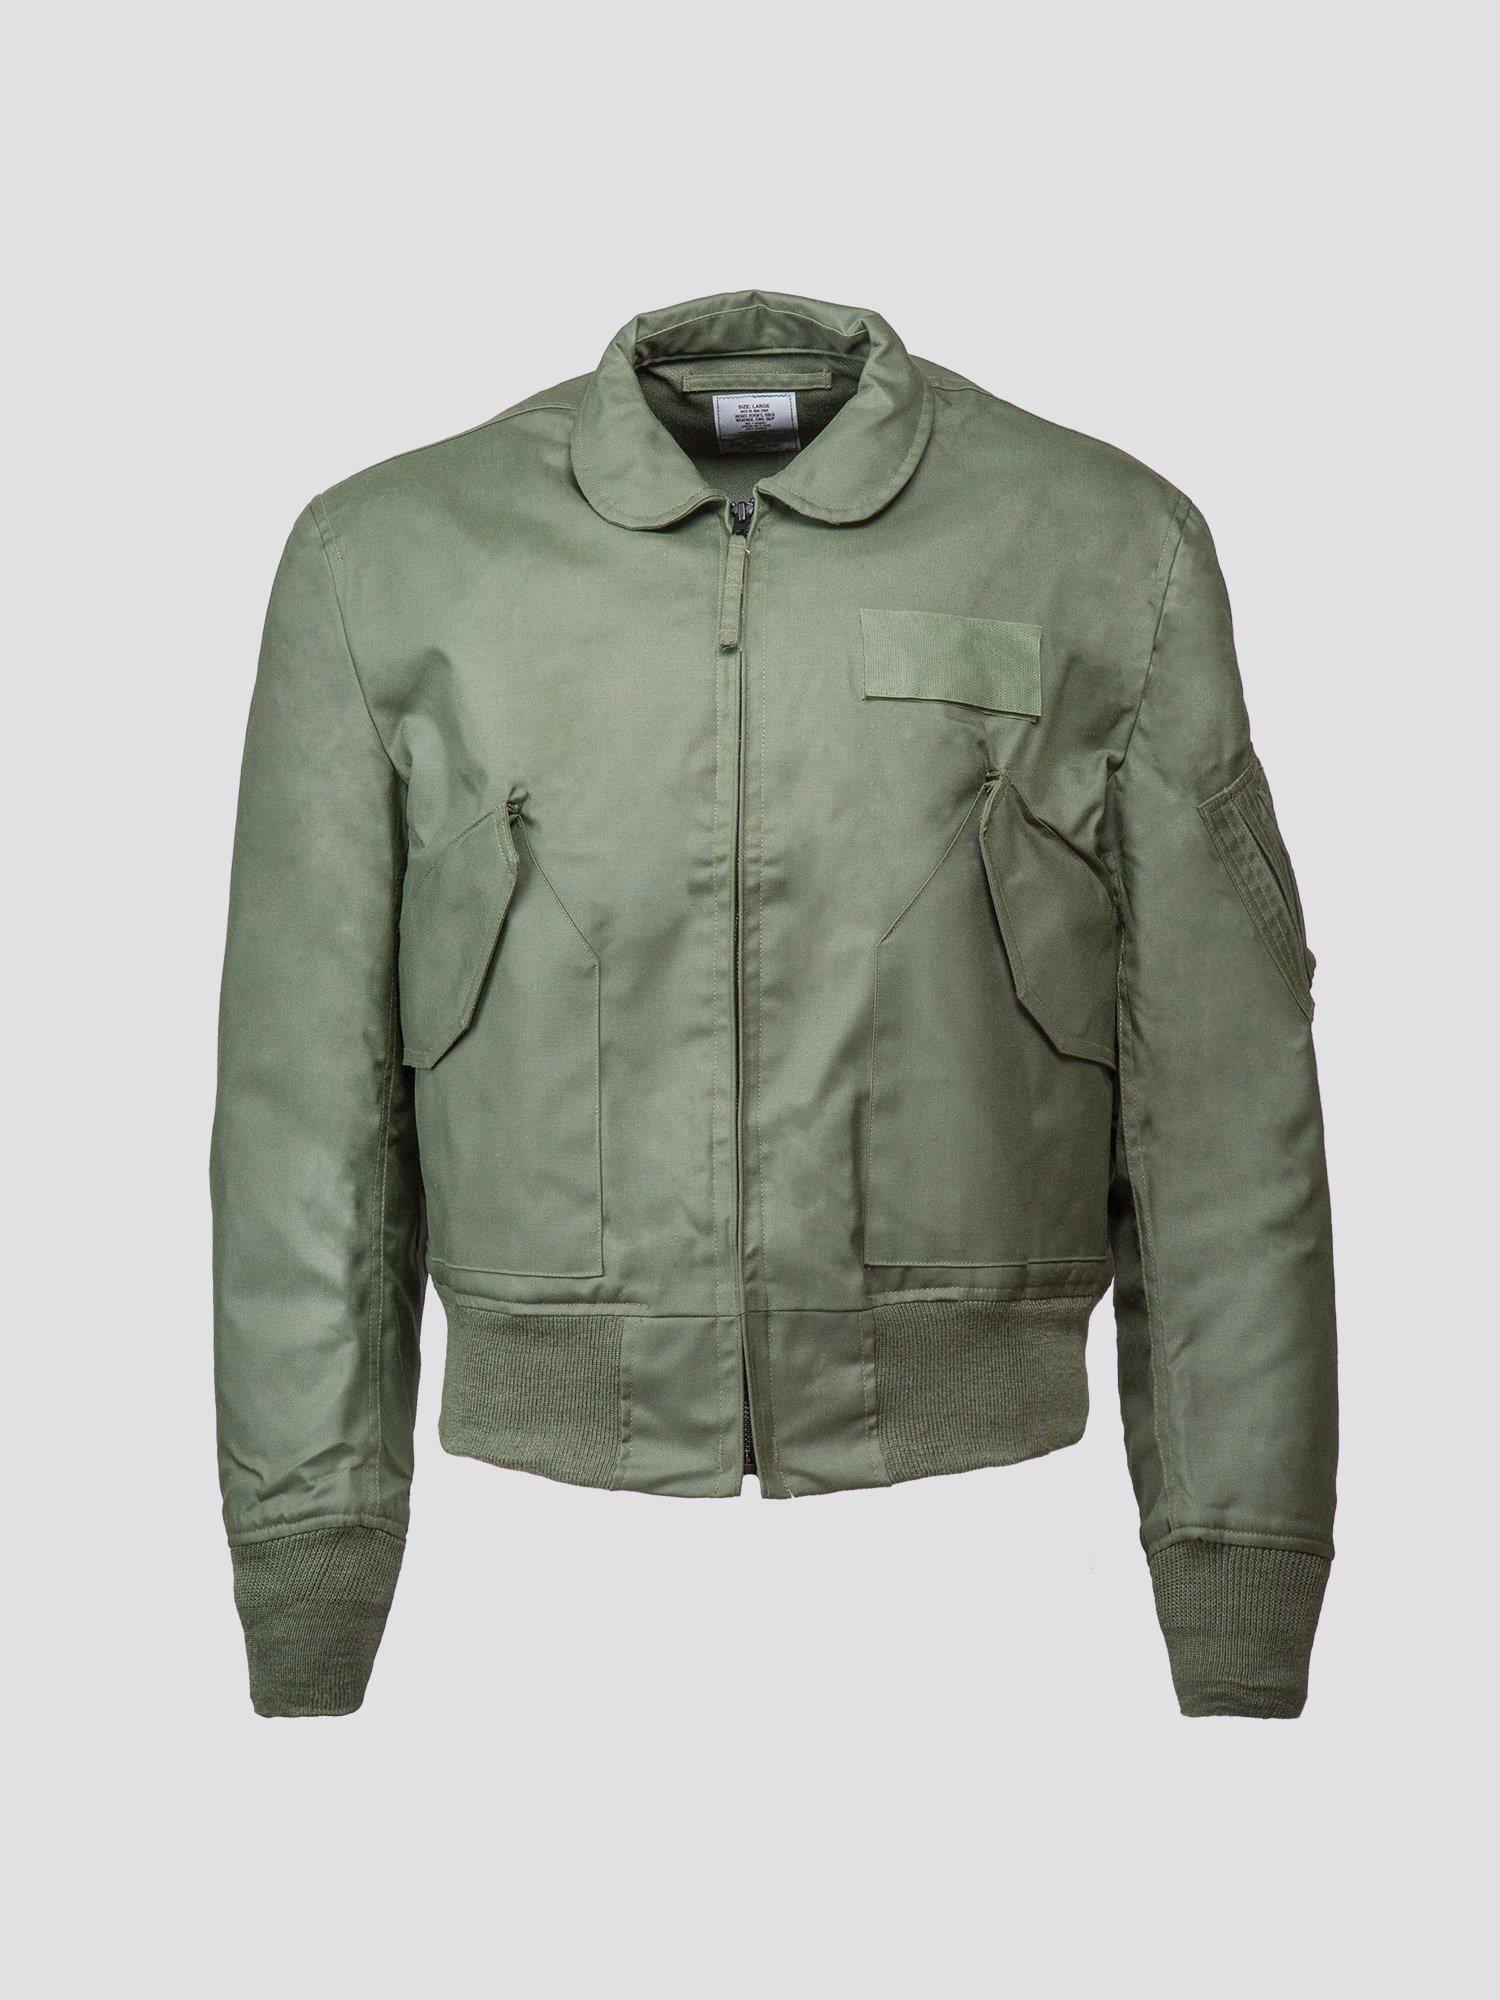 Alpha Industries Cwu 45/p Mil Spec in Sage Green (Green) for Men - Lyst